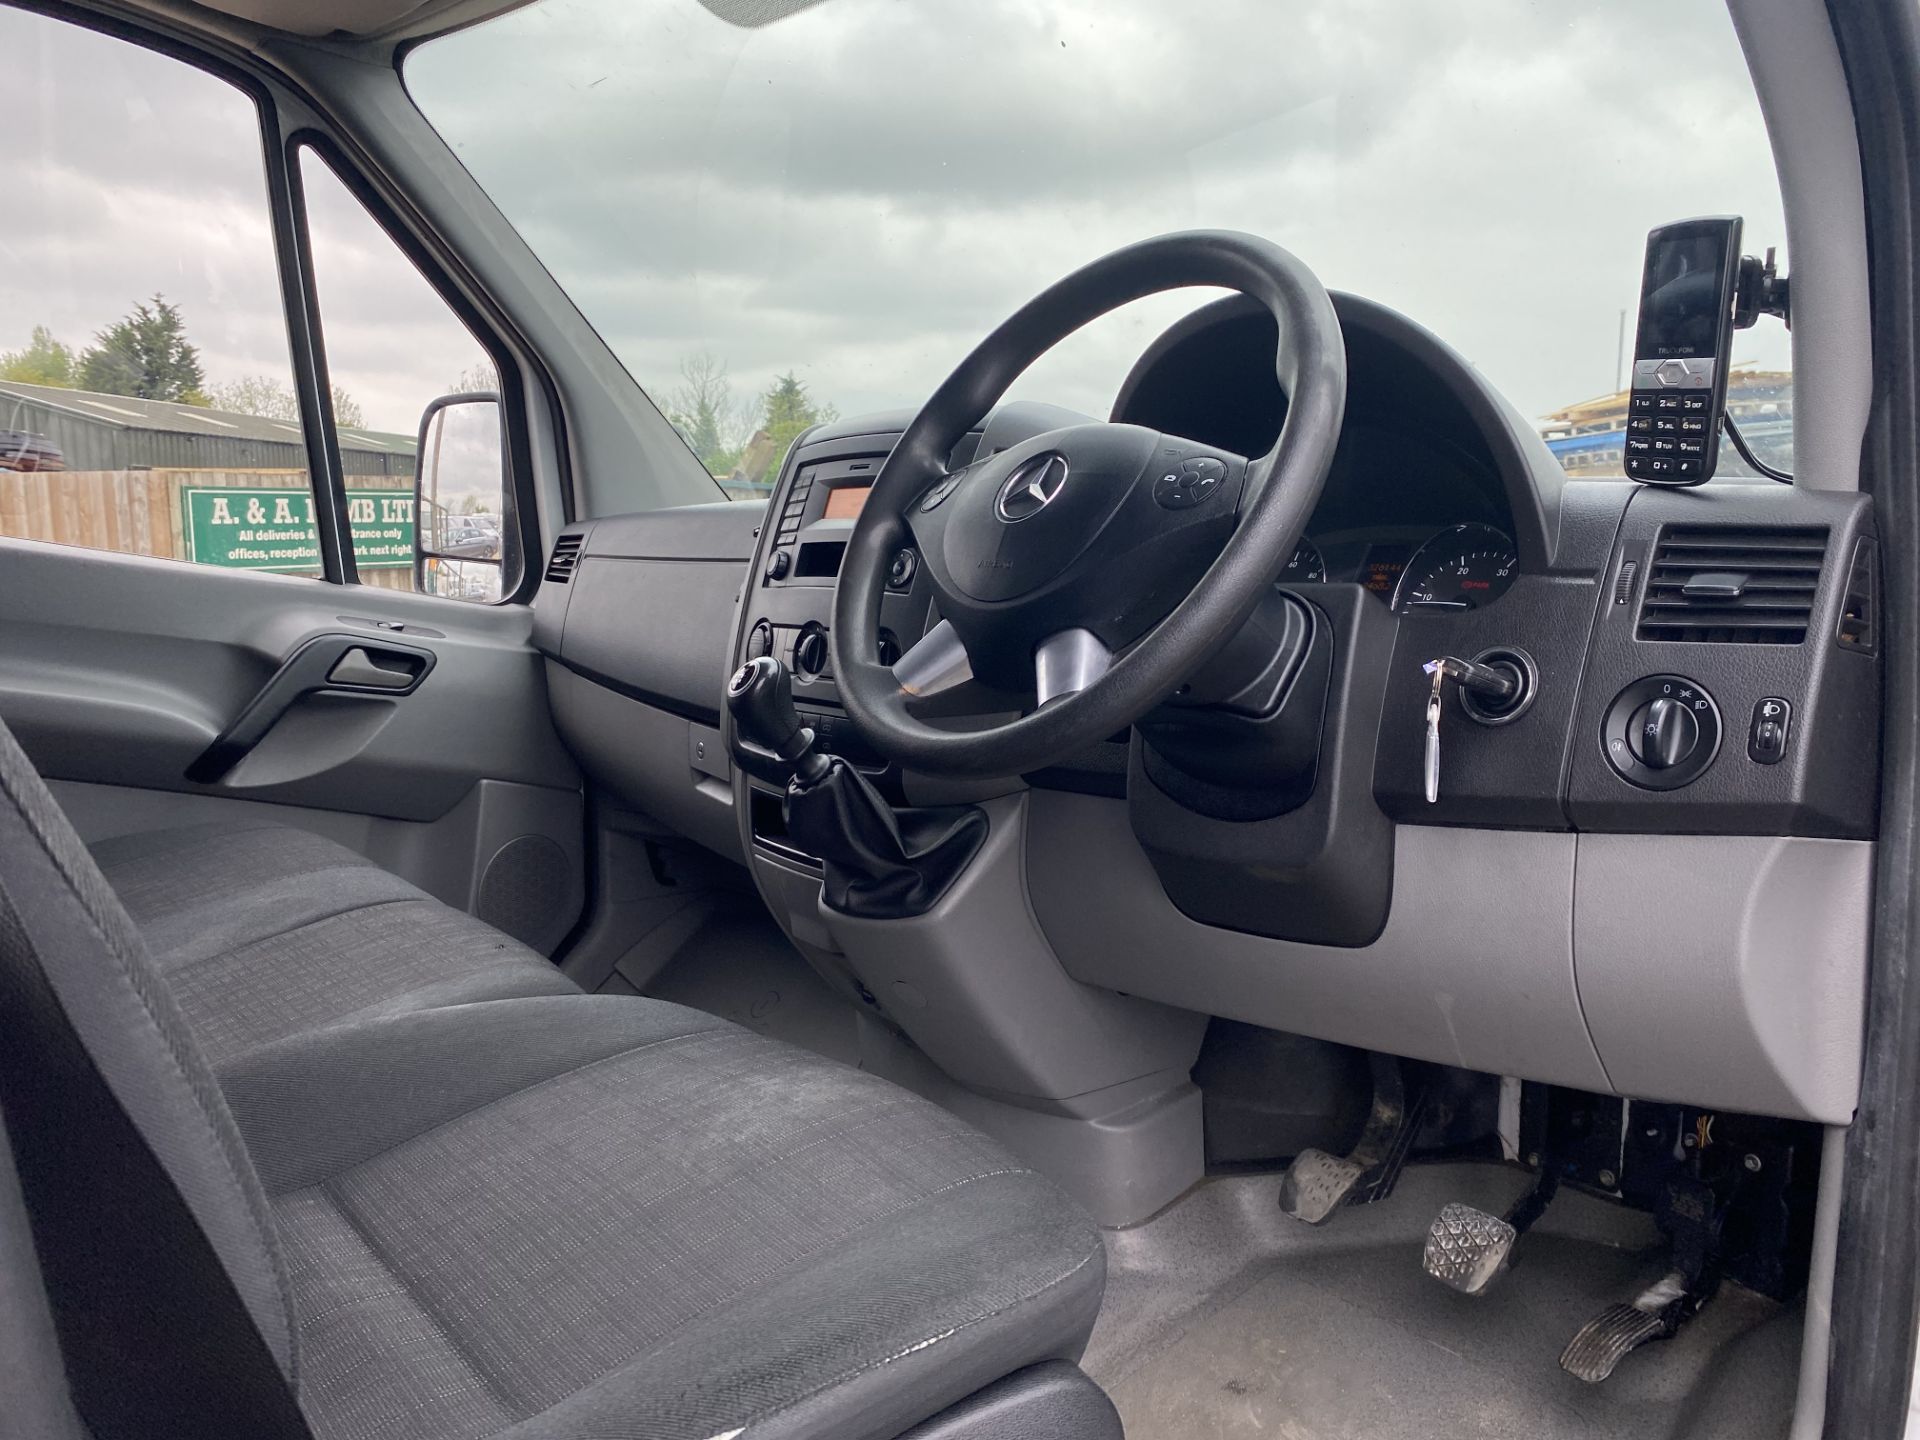 MERCEDES SPRINTER 314CDI "LWB" HIGH ROOF WITH FULL ELECTRIC TAIL-LIFT - 2018 MODEL - 1 OWNER - FSH - Image 15 of 18